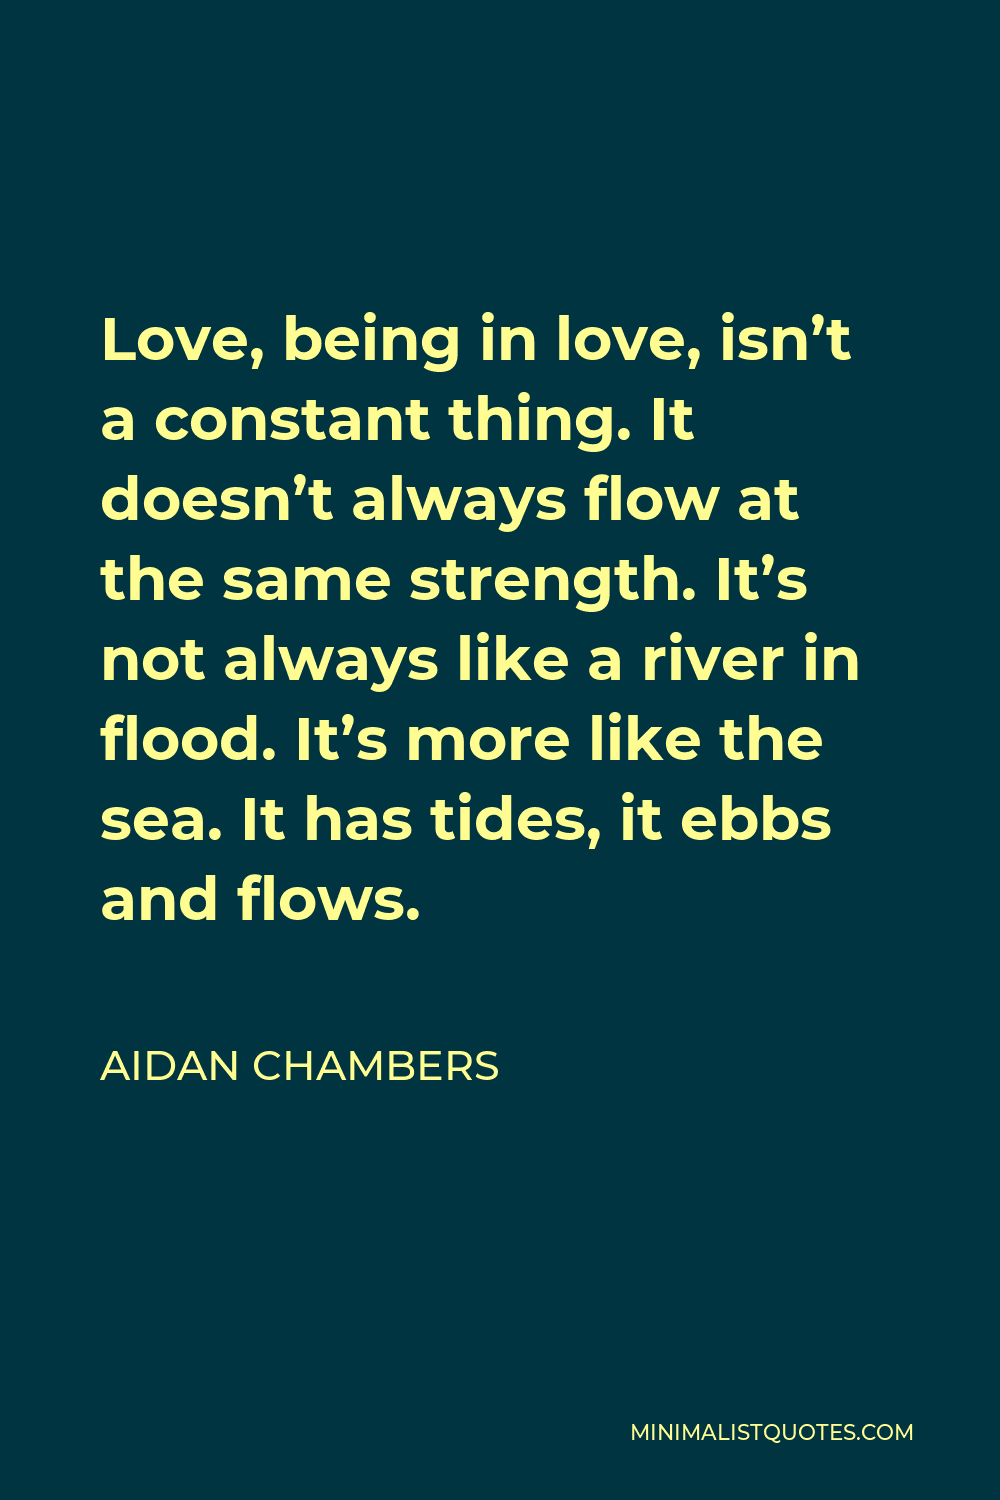 Aidan Chambers Quote - Love, being in love, isn’t a constant thing. It doesn’t always flow at the same strength. It’s not always like a river in flood. It’s more like the sea. It has tides, it ebbs and flows.